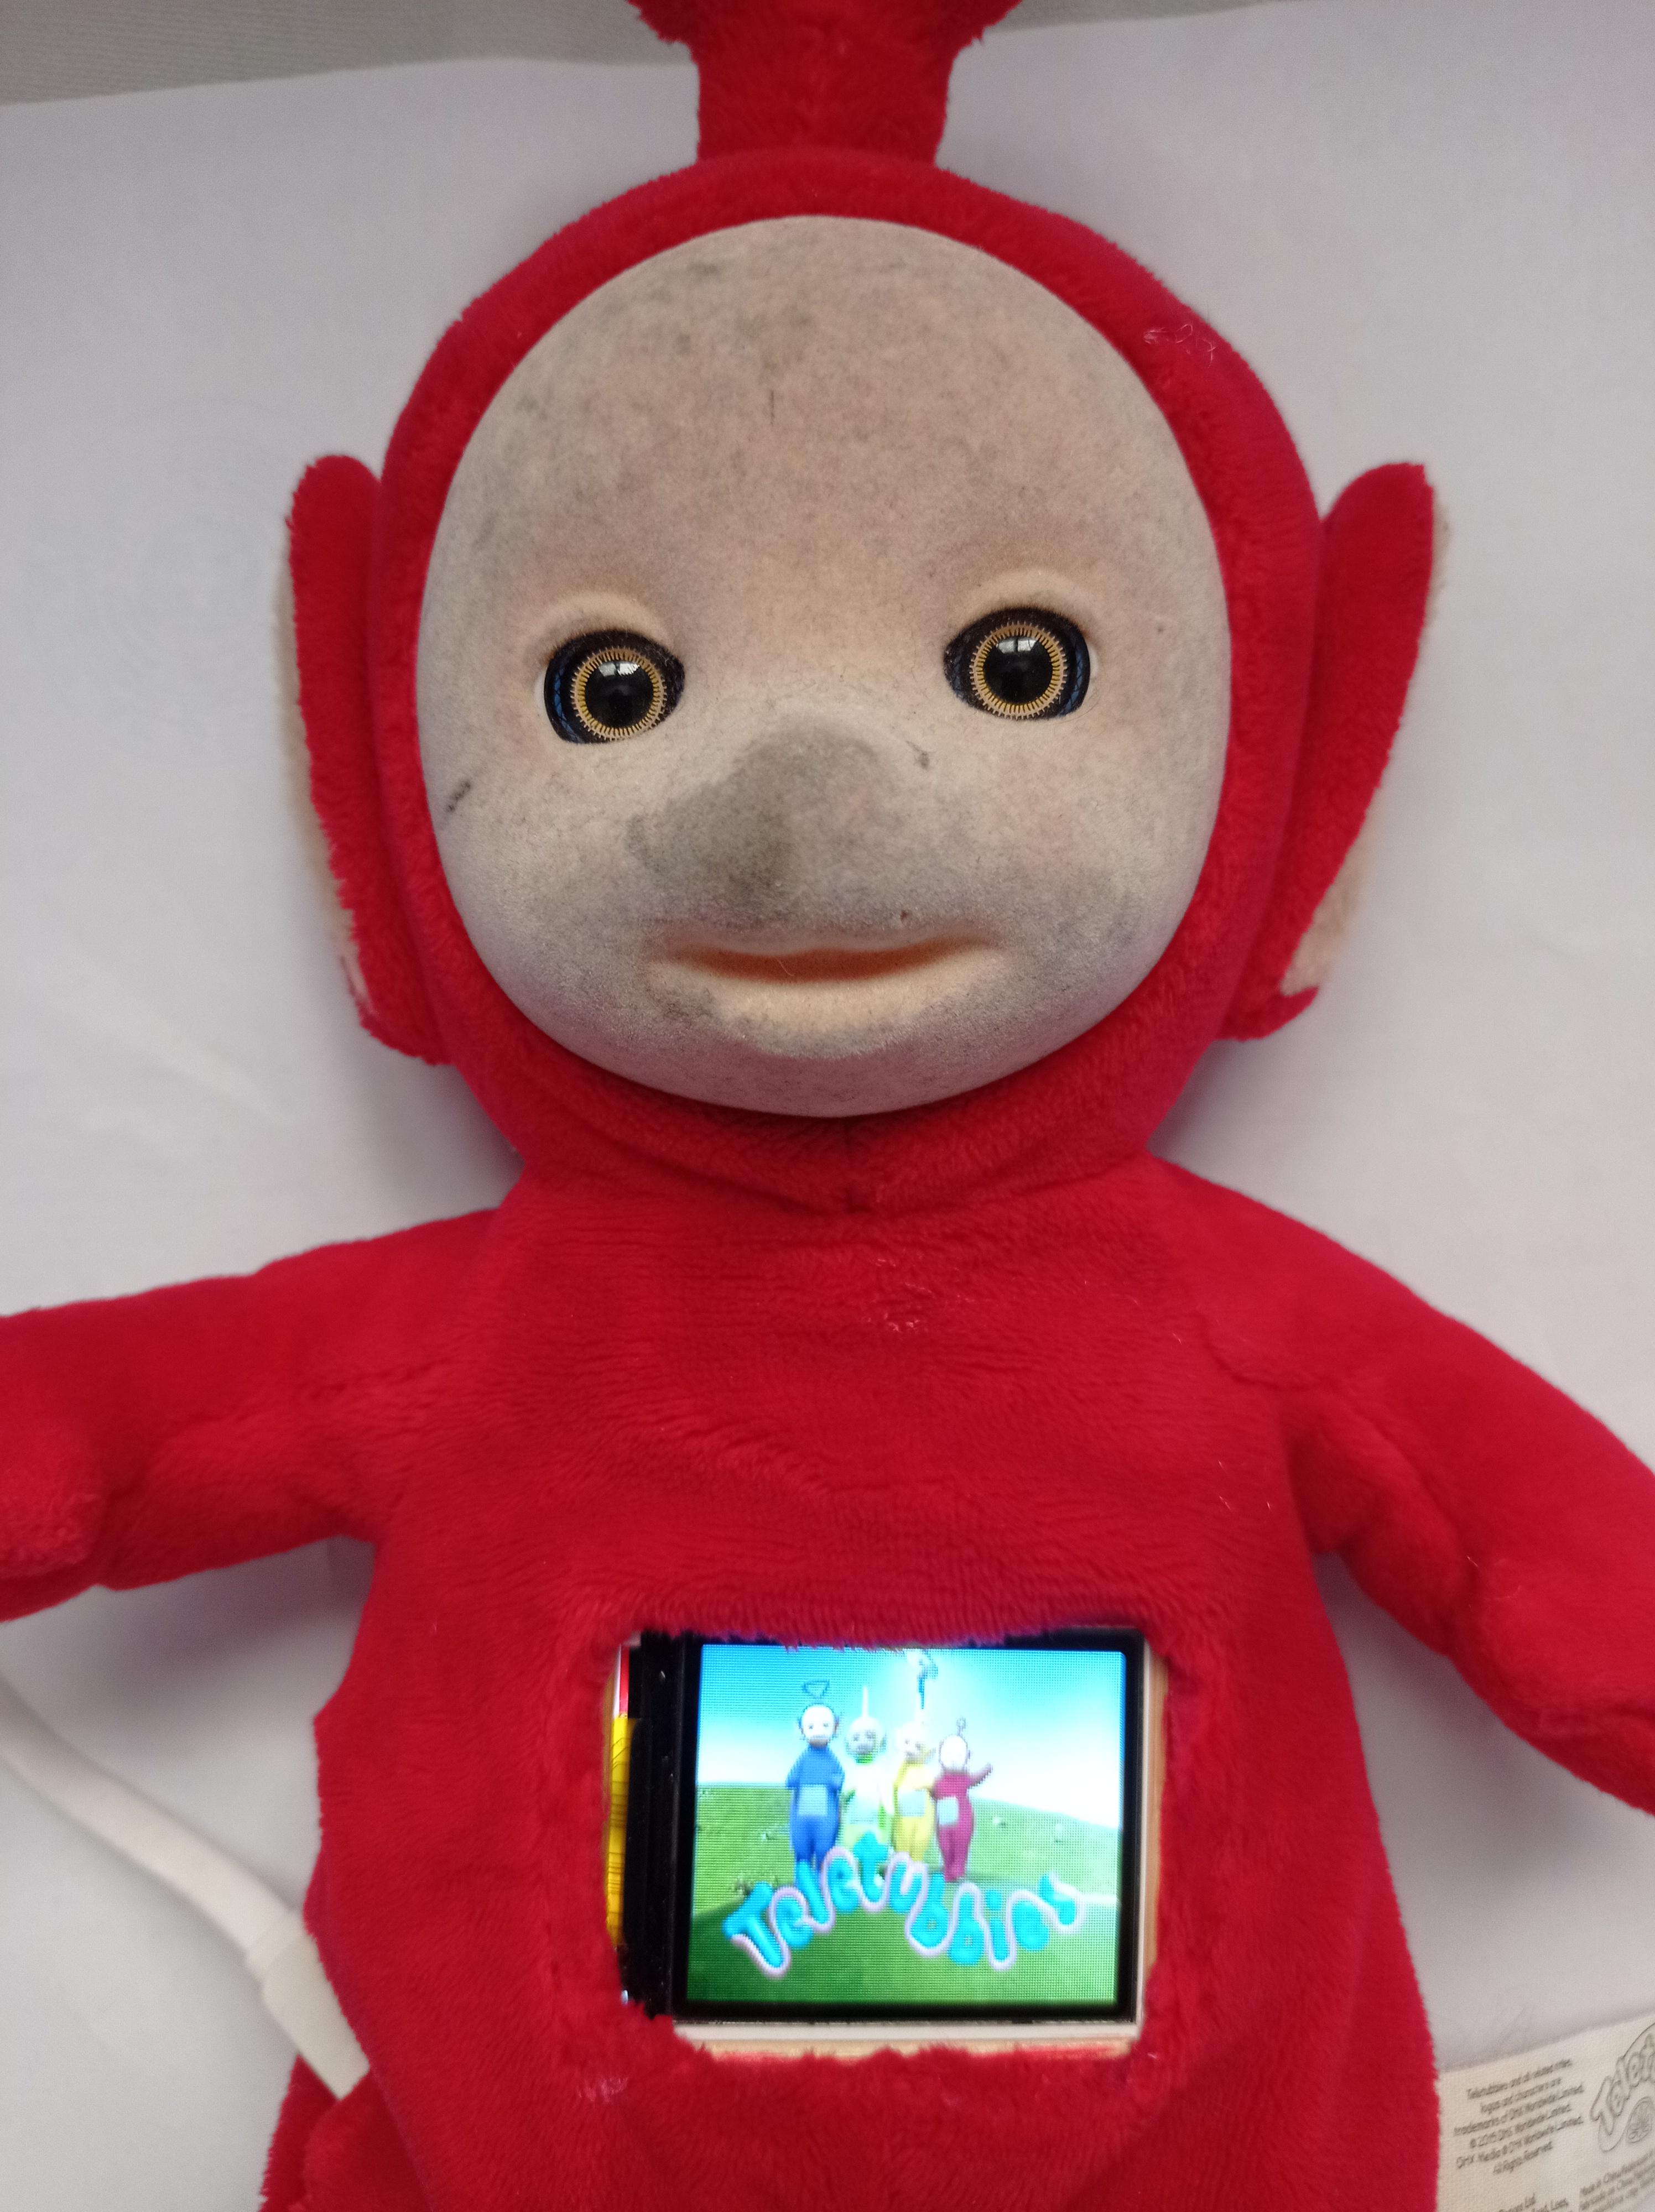 Teletubbies Toy With Real LCD Screen on Its Tummy Playing Real Videos With Sound